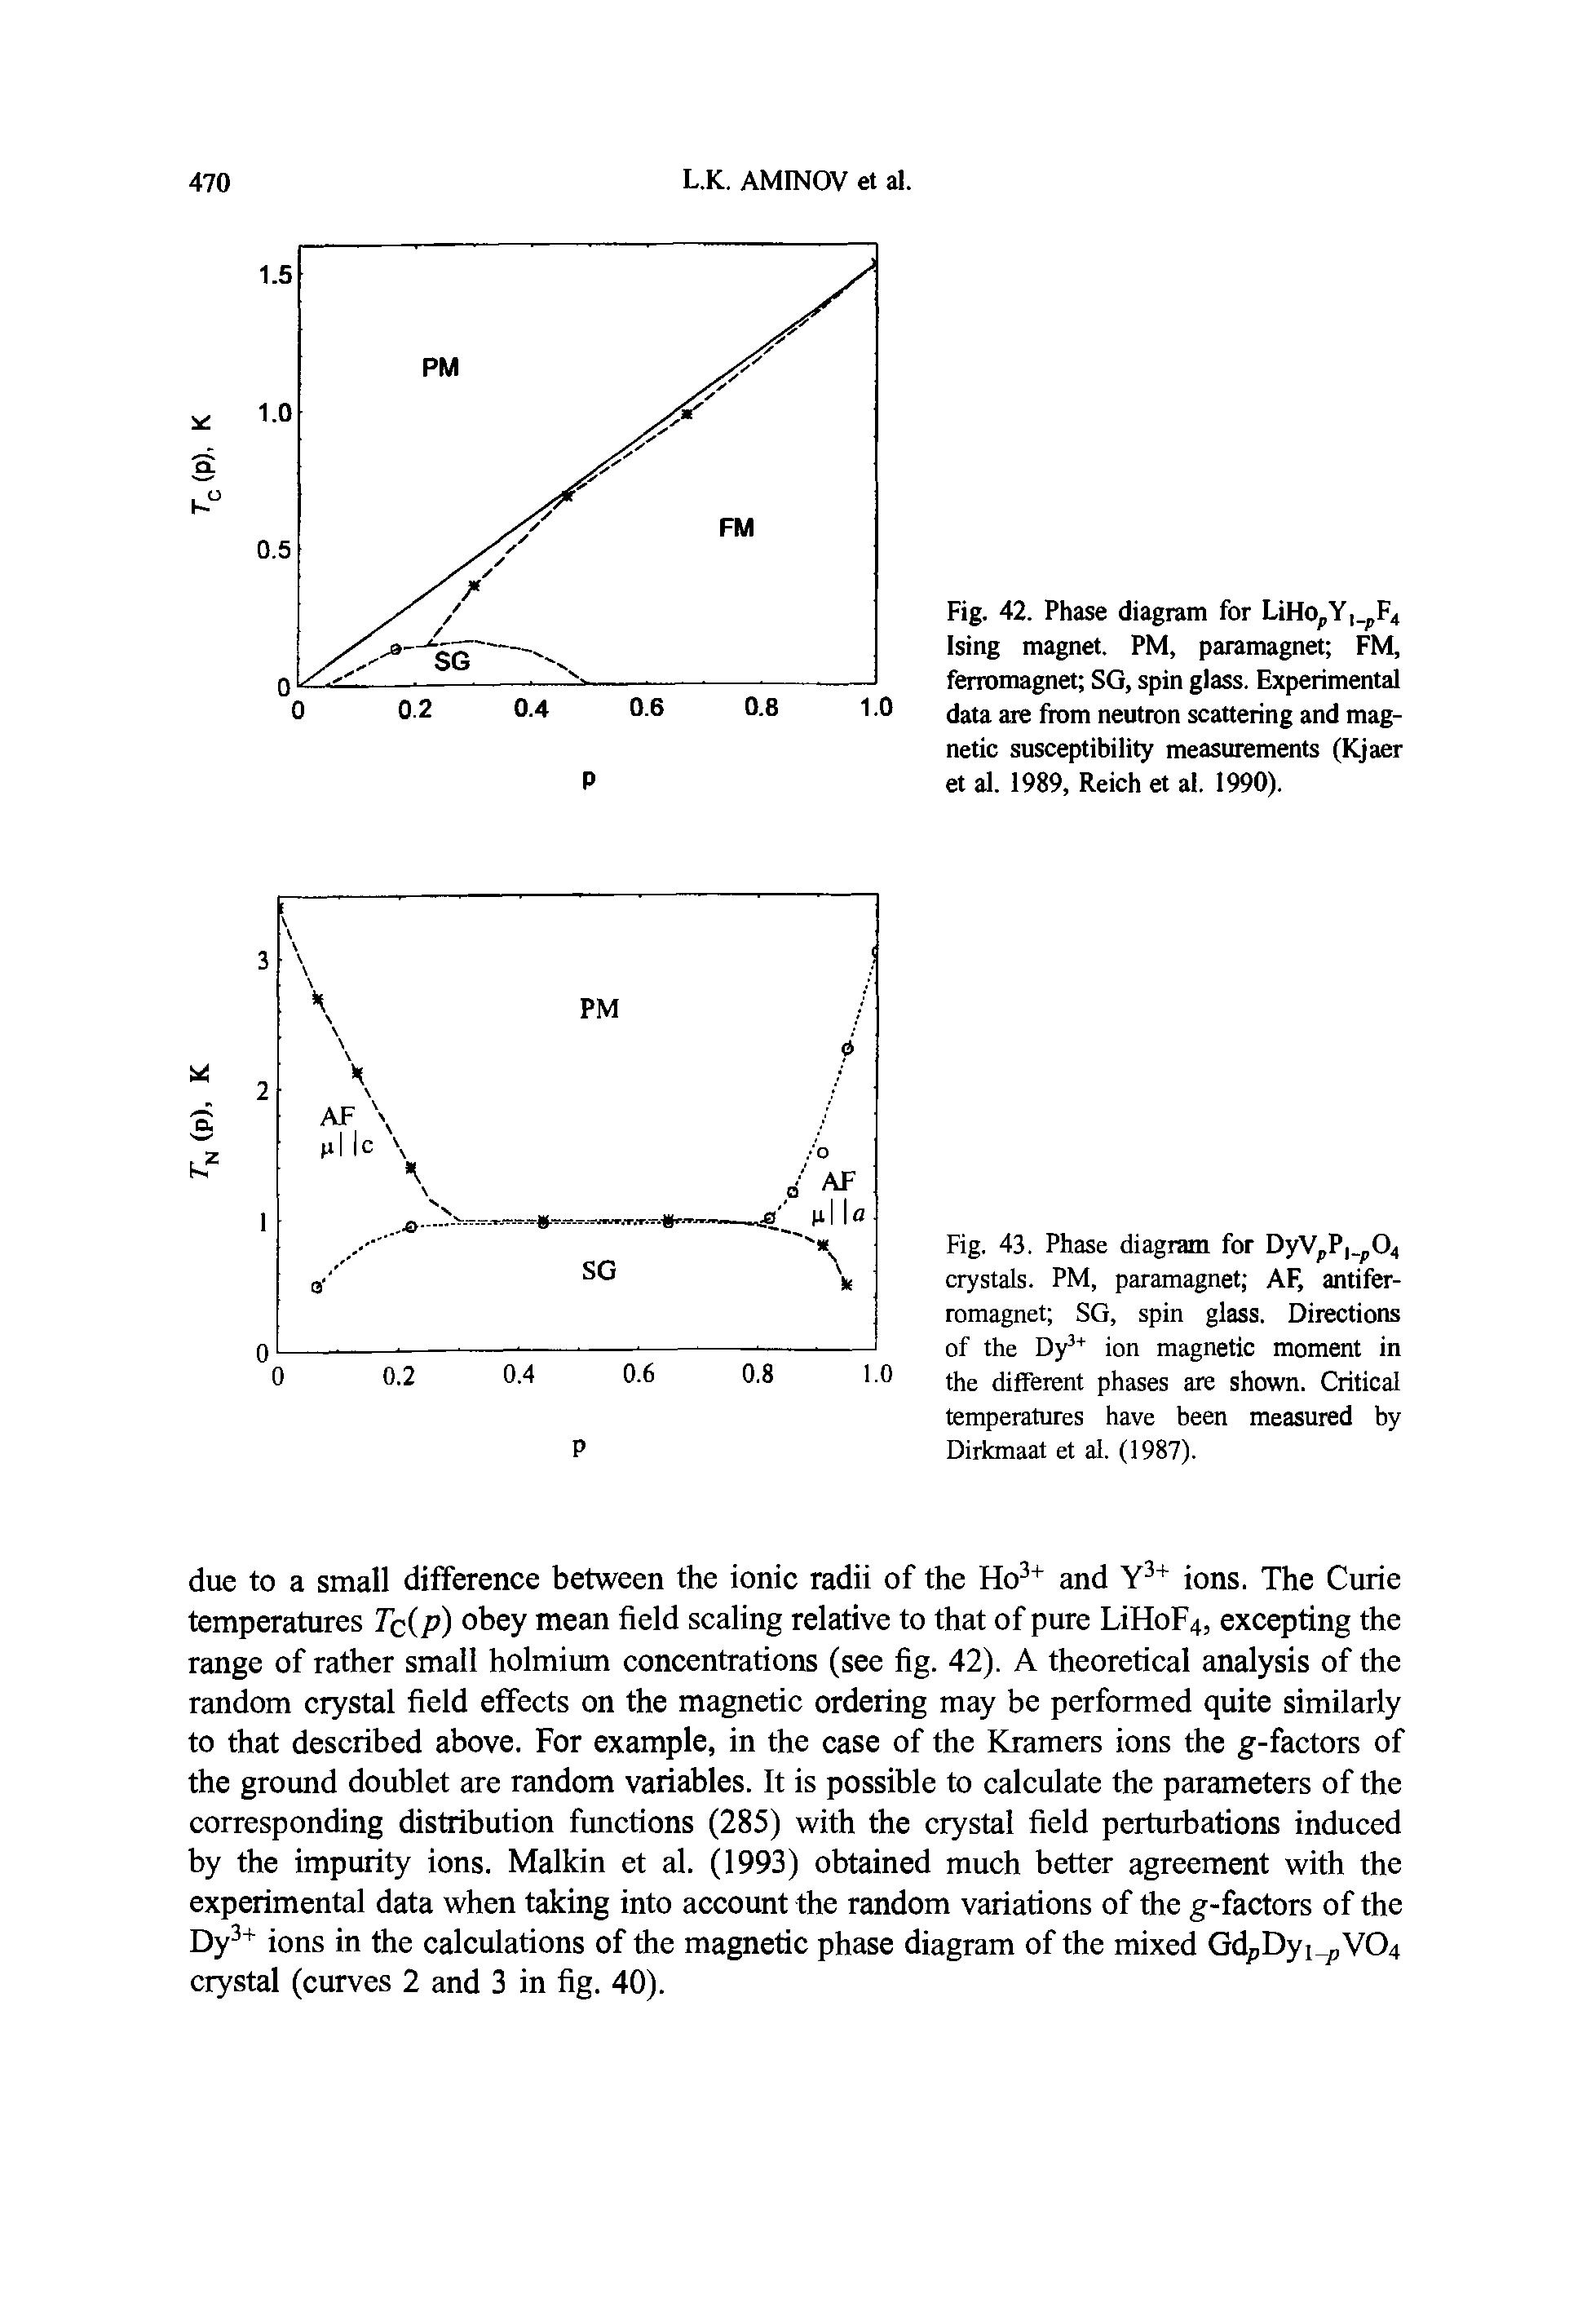 Fig. 42. Phase diagram for LiHo,Y, F4 Ising magnet. PM, paramagne FM, ferromagnet SG, spin glass. Experimental data are from neutron scattering and magnetic susceptibility measurements (Kjaer et al. 1989, Reich et al. 1990).